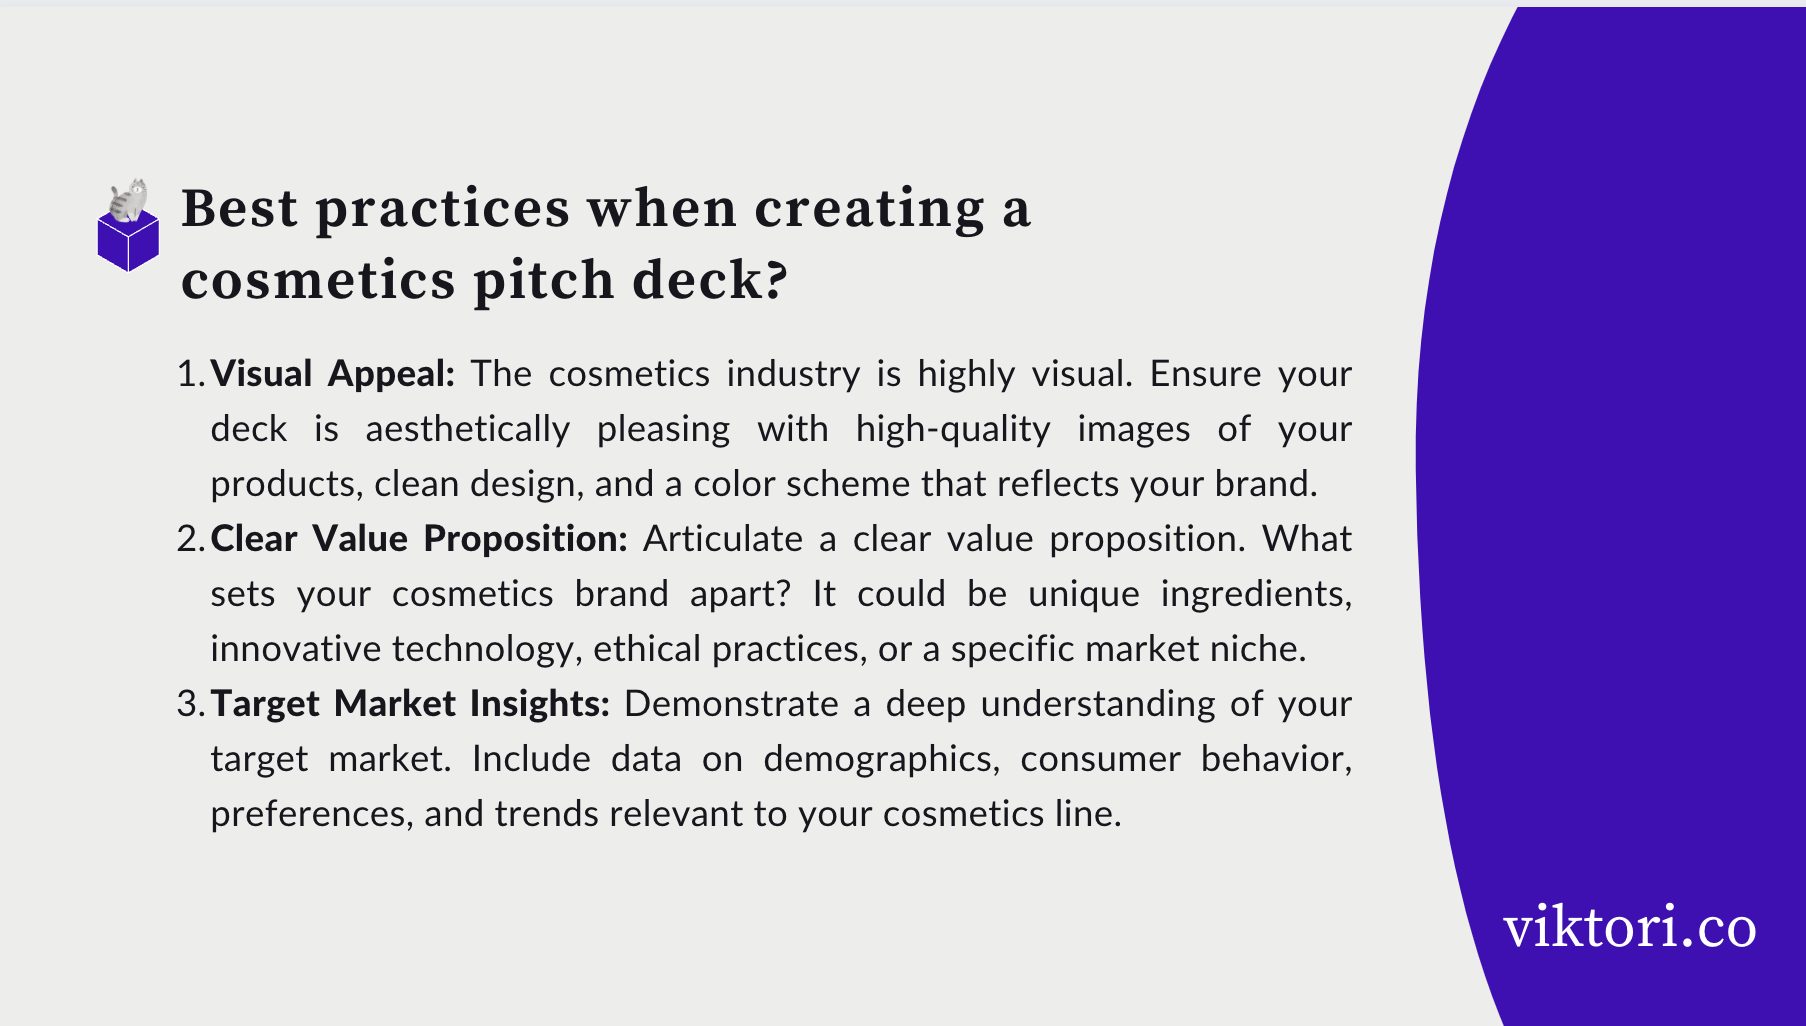 3 best practices when creating a cosmetics pitch deck